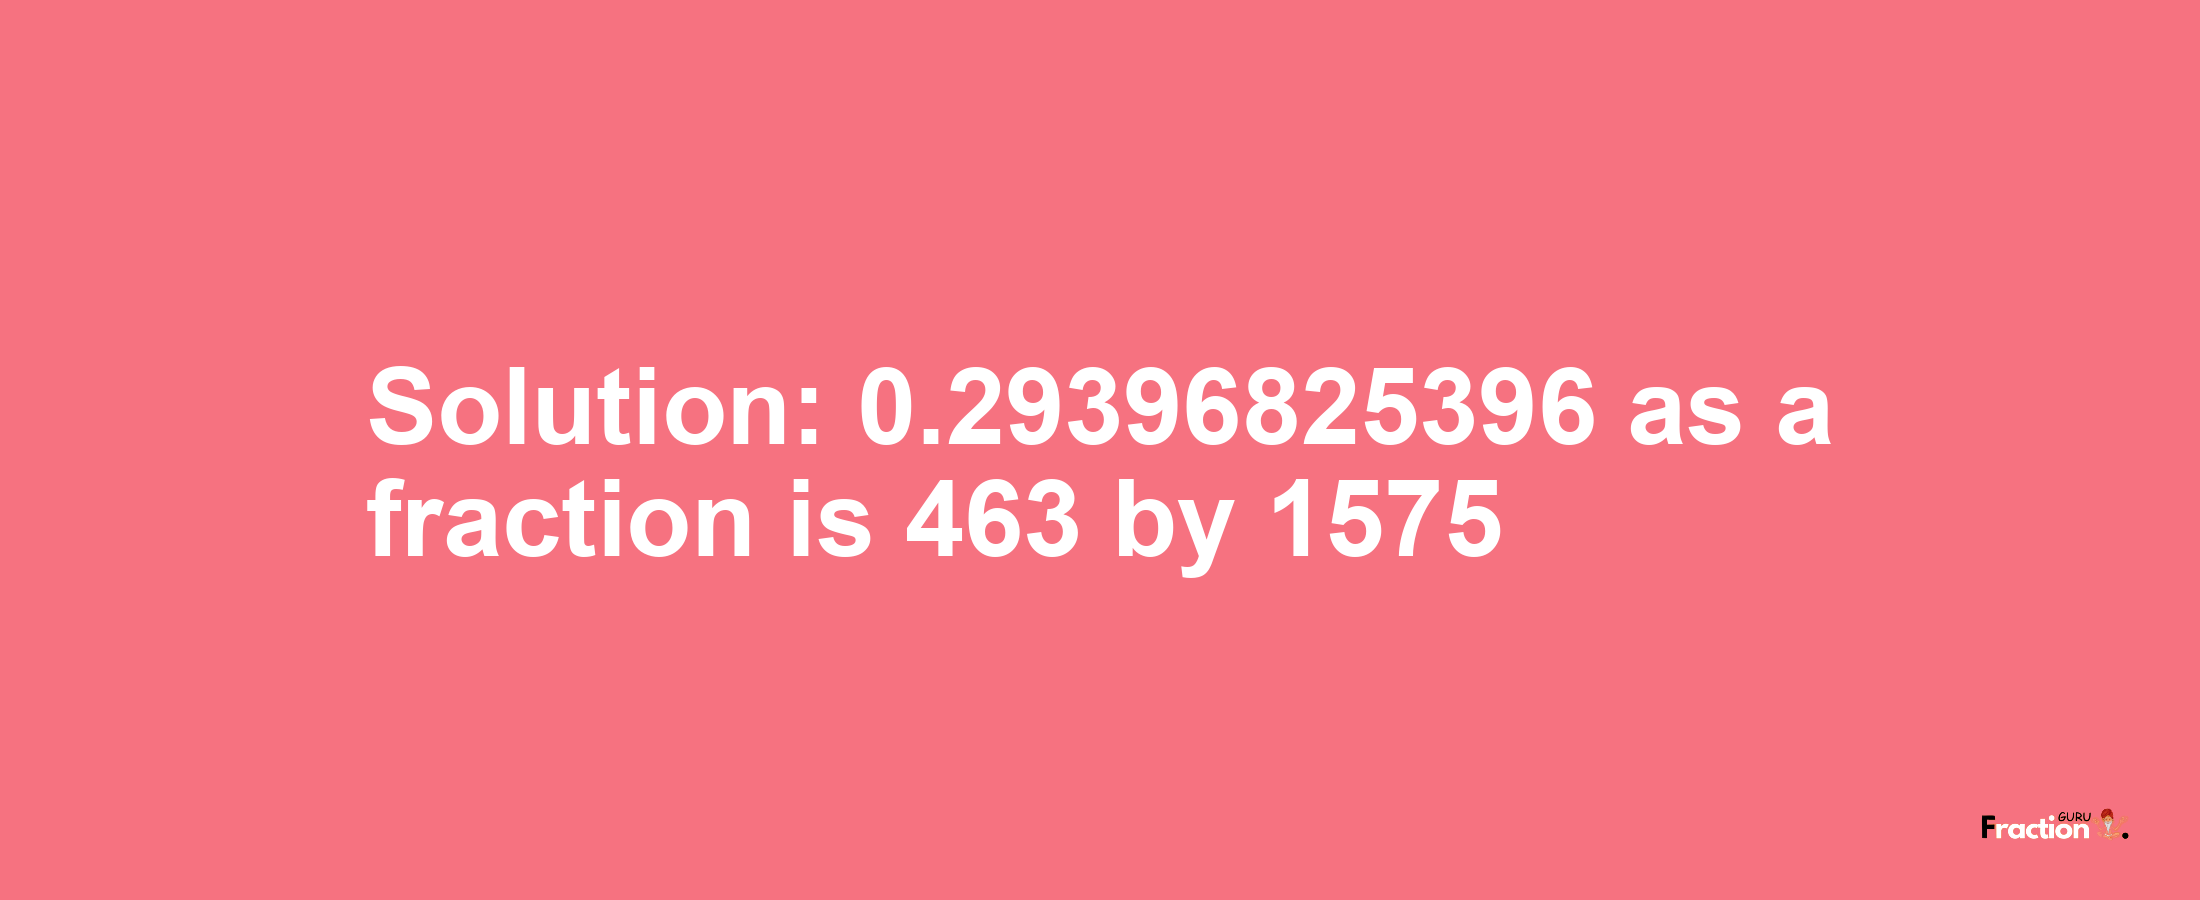 Solution:0.29396825396 as a fraction is 463/1575